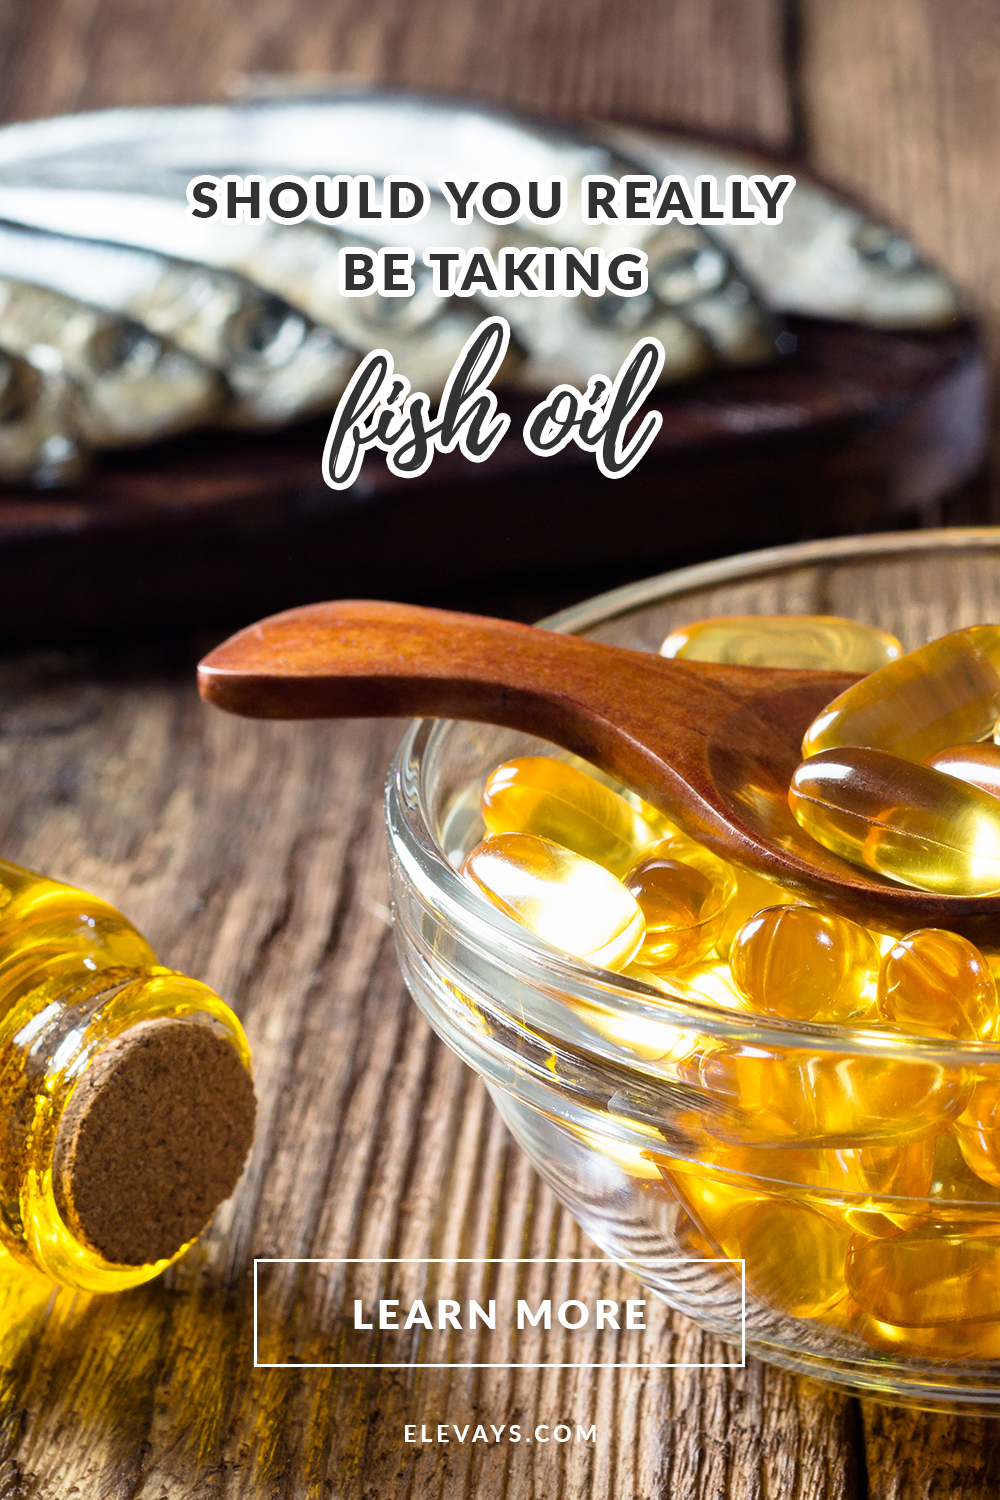 The Side Effects of Fish Oil - Should You Really Be Taking it?